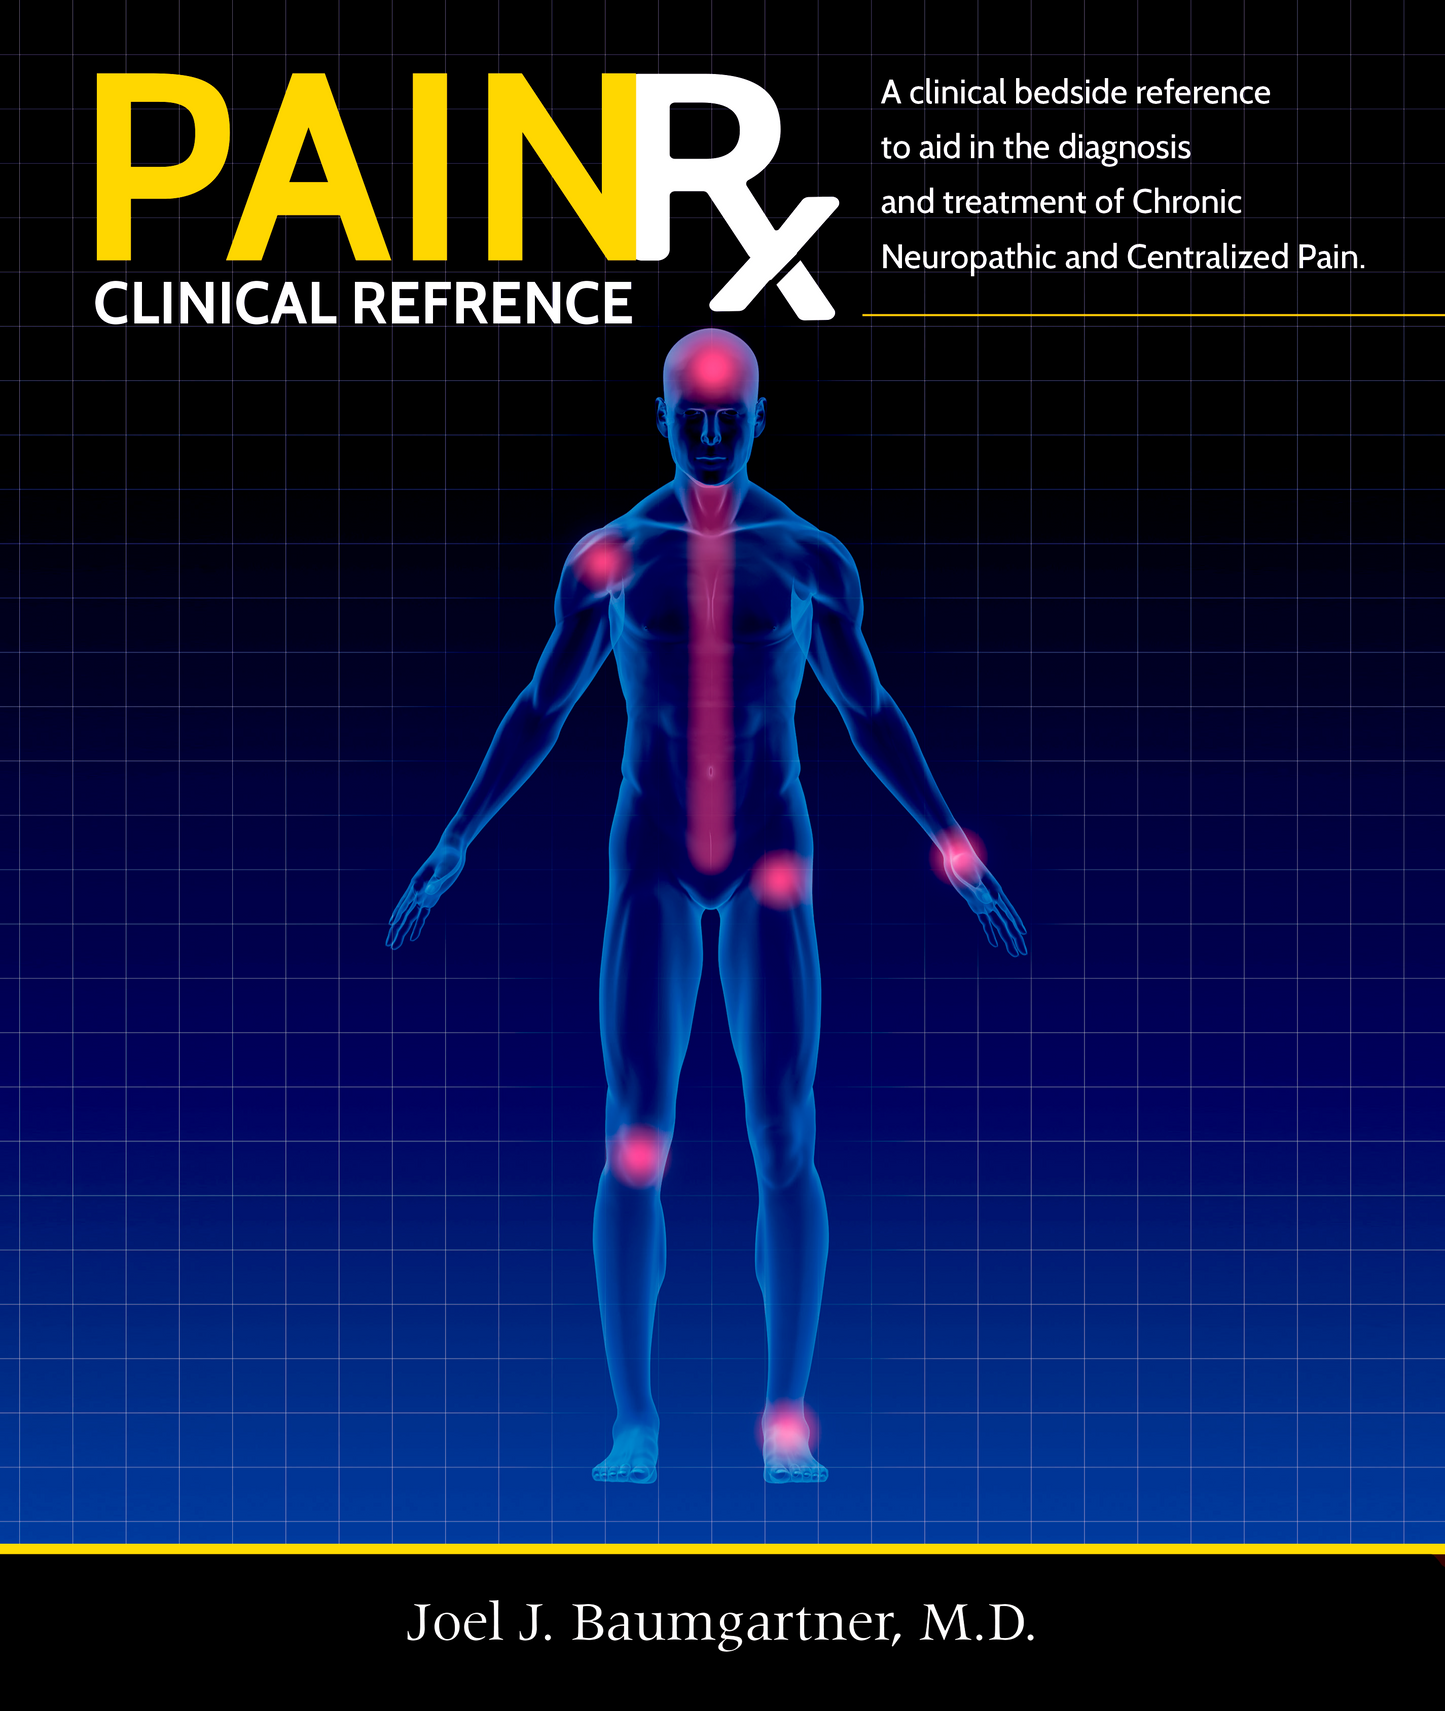 PainRX Clinical Bedside Reference & Comprehensive Guide